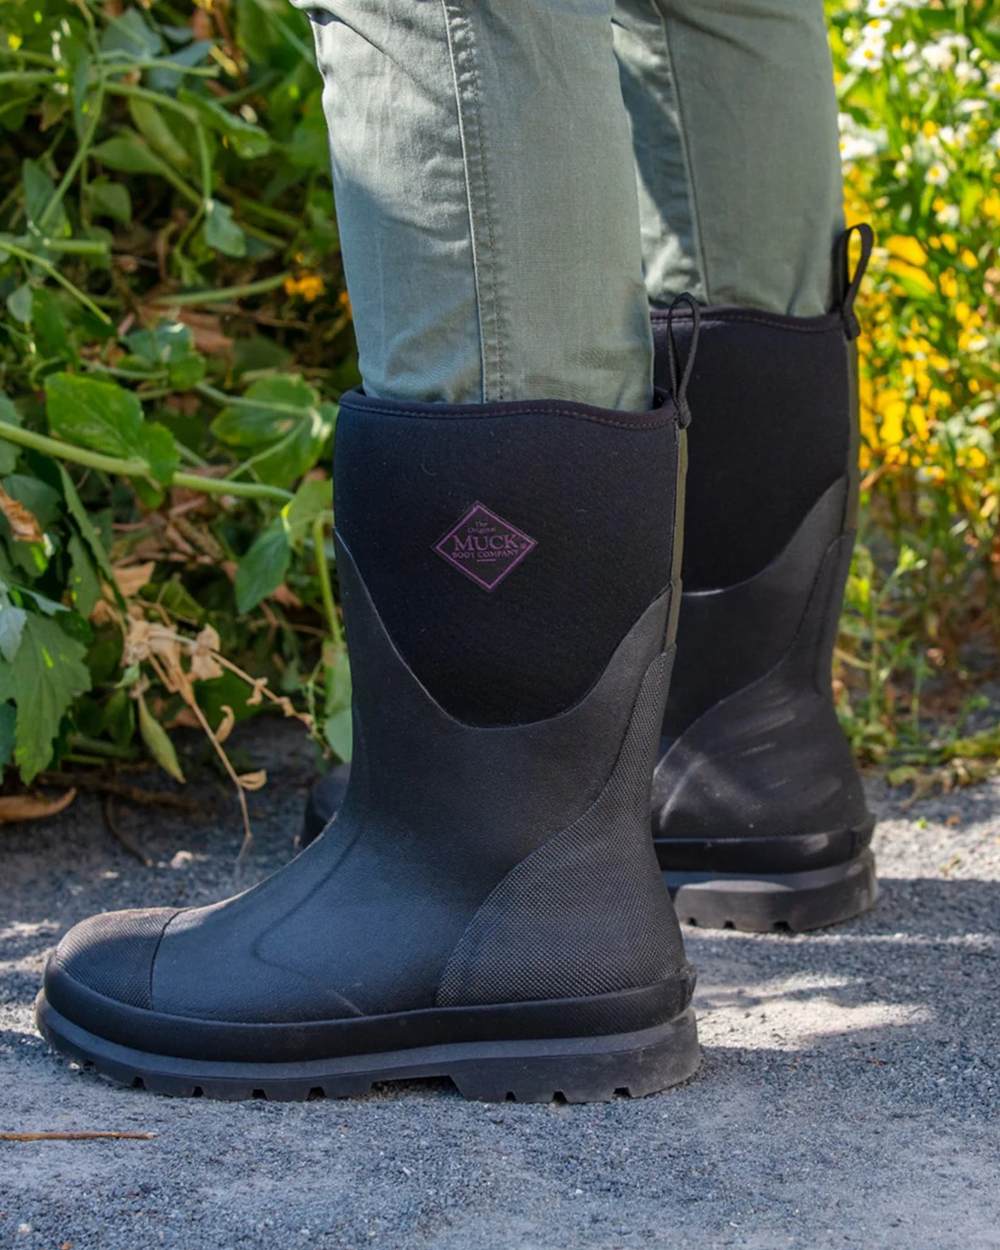 Black Coloured Muck Boots Womens Chore Classic Mid Wellingtons On A Street Background